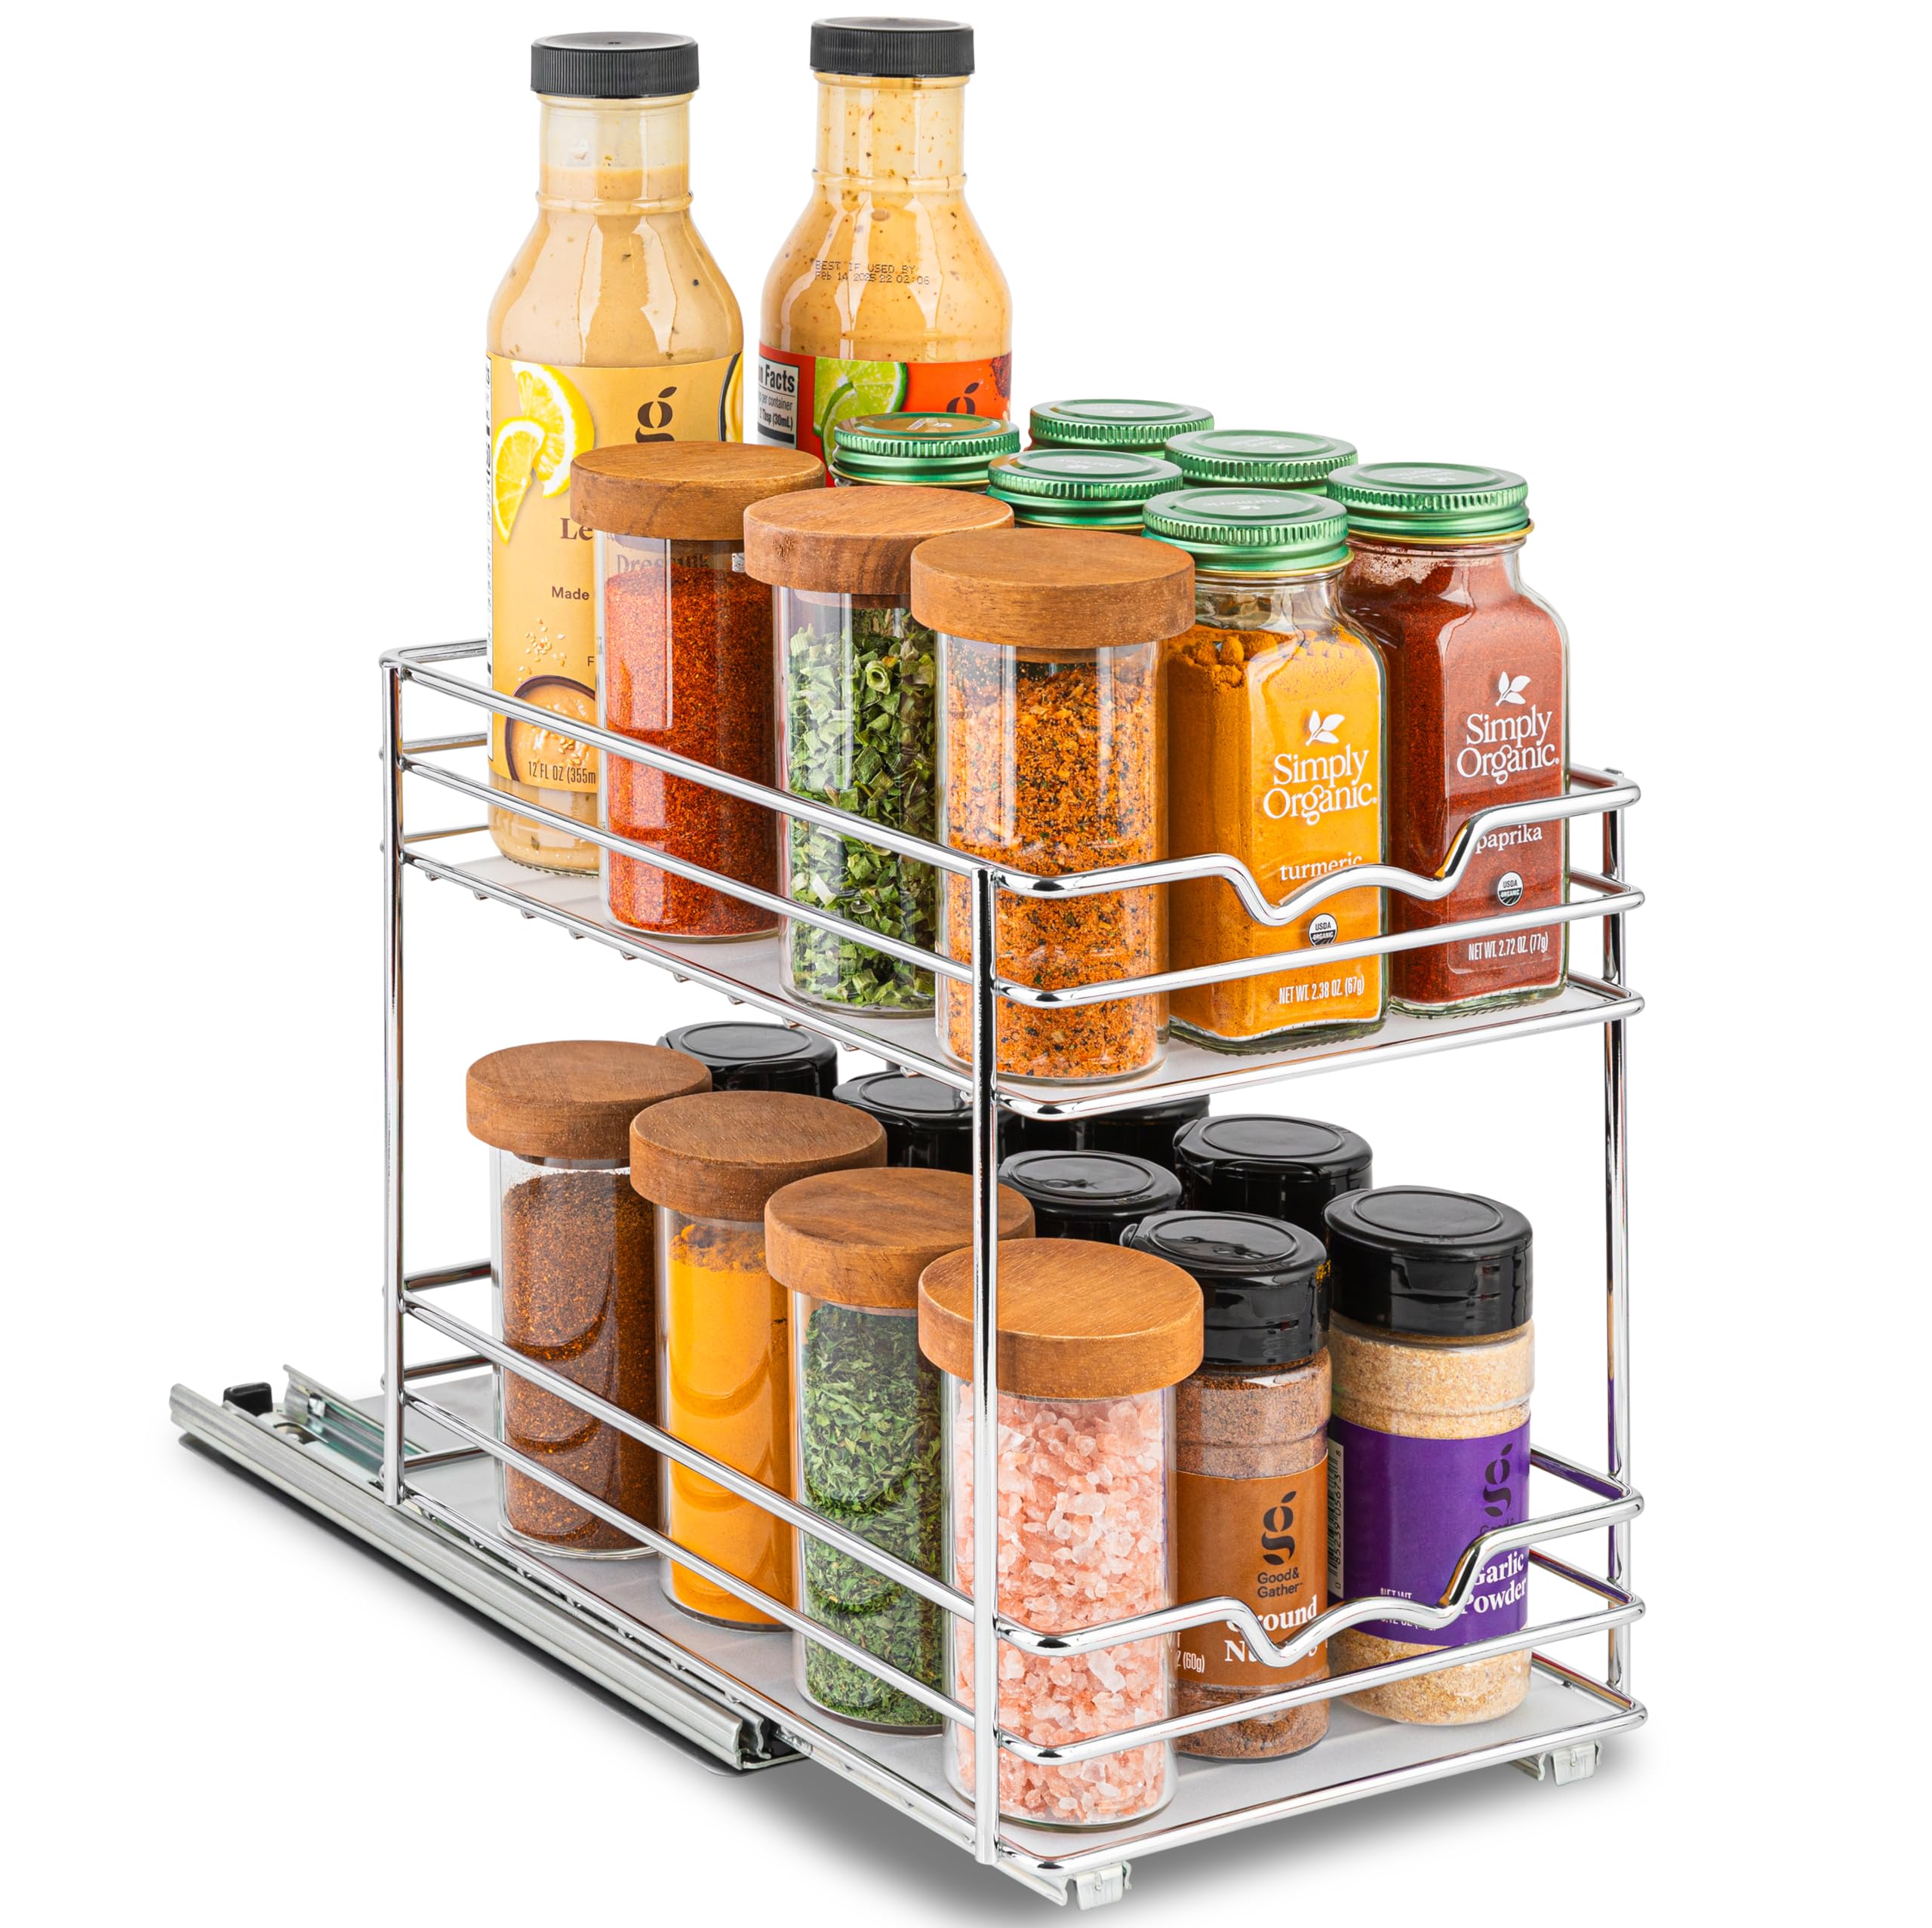 HOLD N' STORAGE Premium Pull-Out Spice Rack - 6.5"W x 10"D - Anti-Rust Chrome Finish - Heavy Duty with 5-Year Limited Warranty- Fits 3 Rows of Standard Spice Jars  - Like New